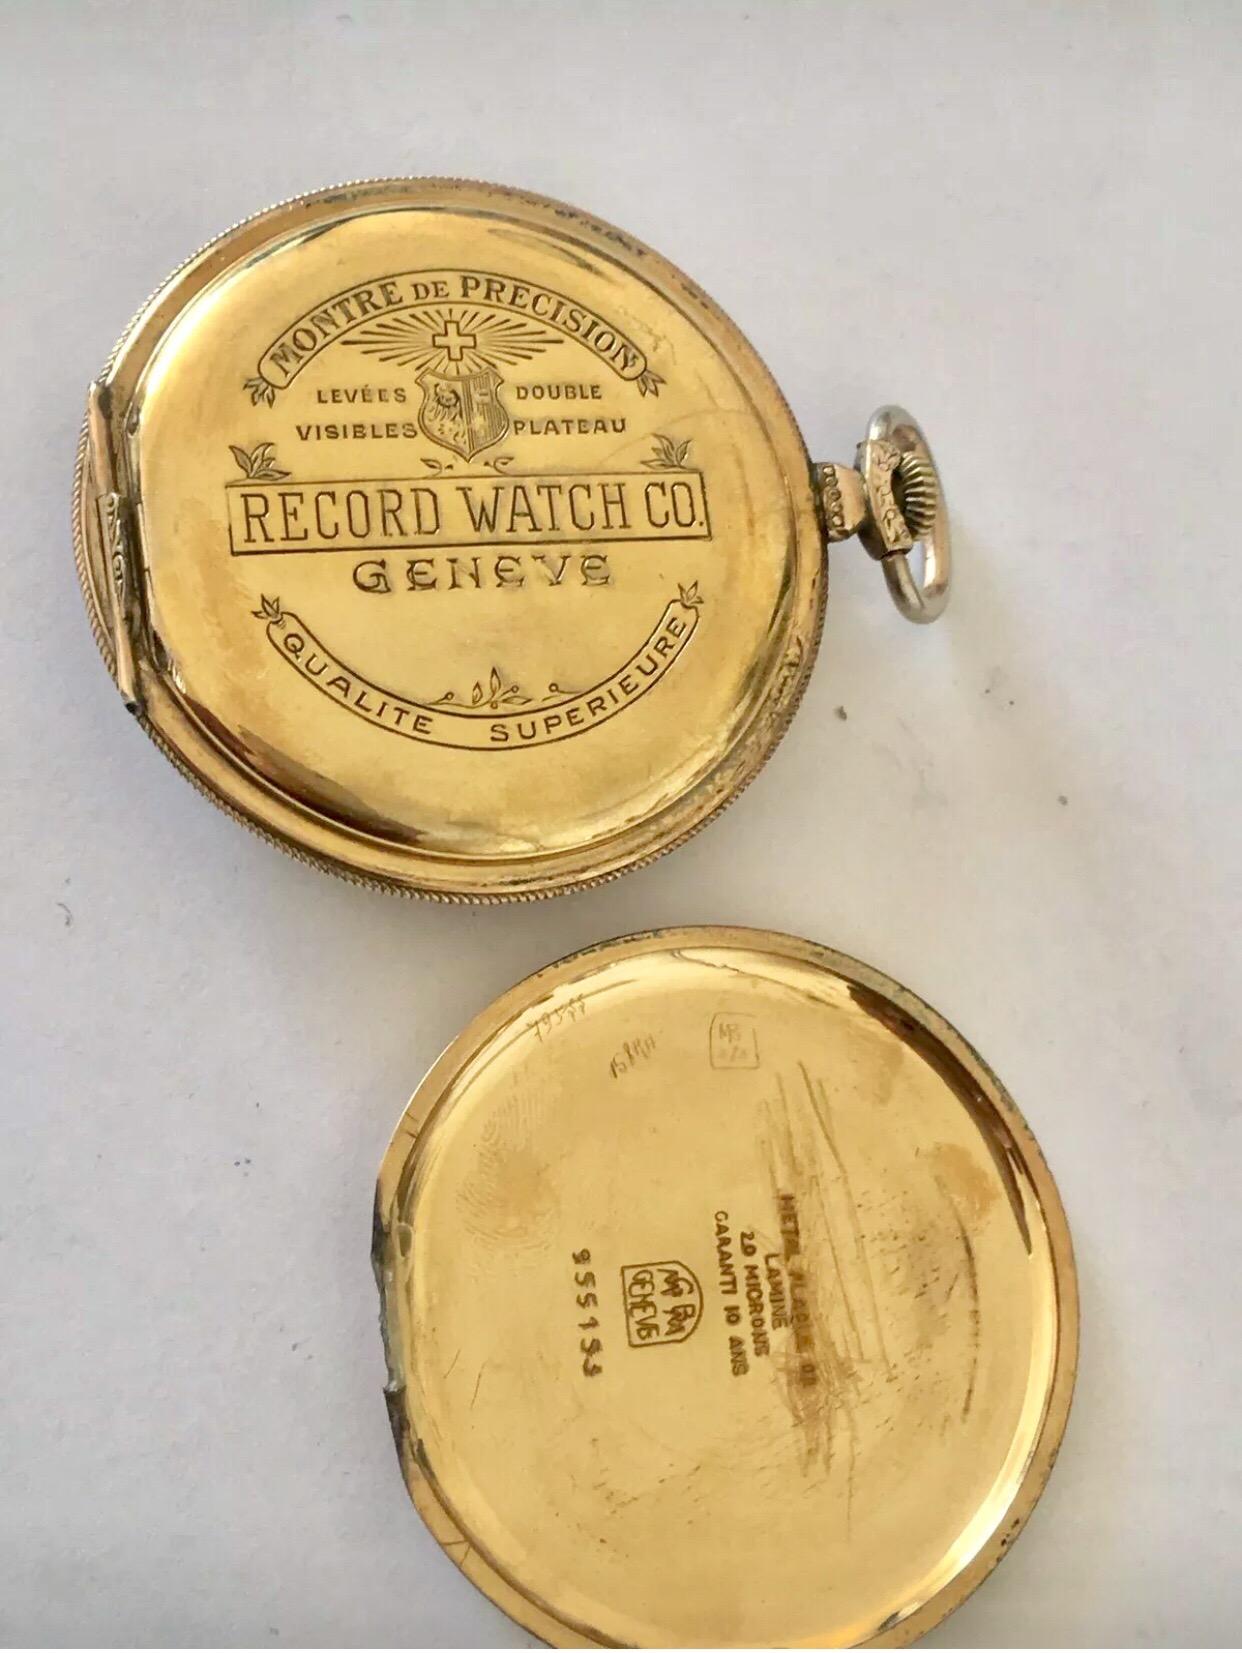 Antique Gold Plated Record Watch Co. Geneve Dress Pocket Watch.

This beautiful watch is in good working condition and it is ticking well. Visible signs of ageing and wear with light scratches on the case. The silvered dial has aged and the back